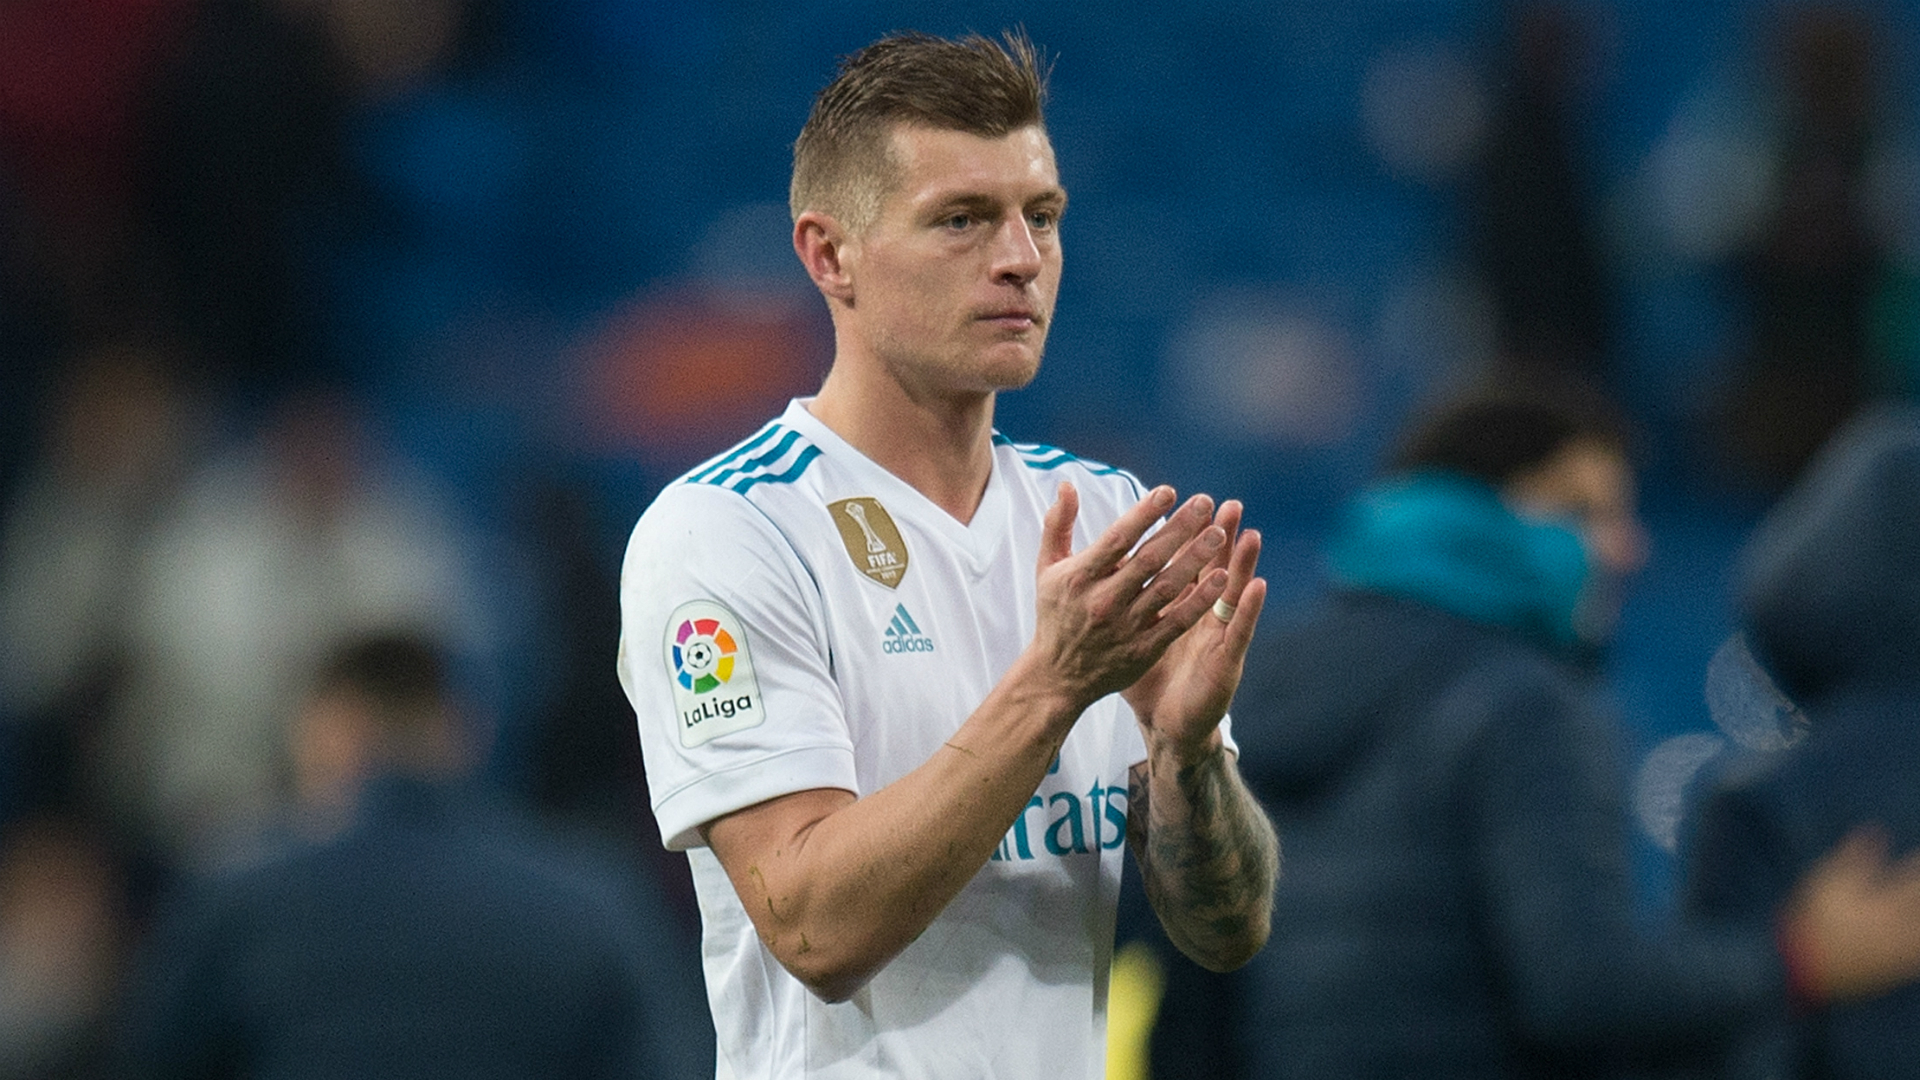 Kroos says Madrid must focus on qualifying for Champions League